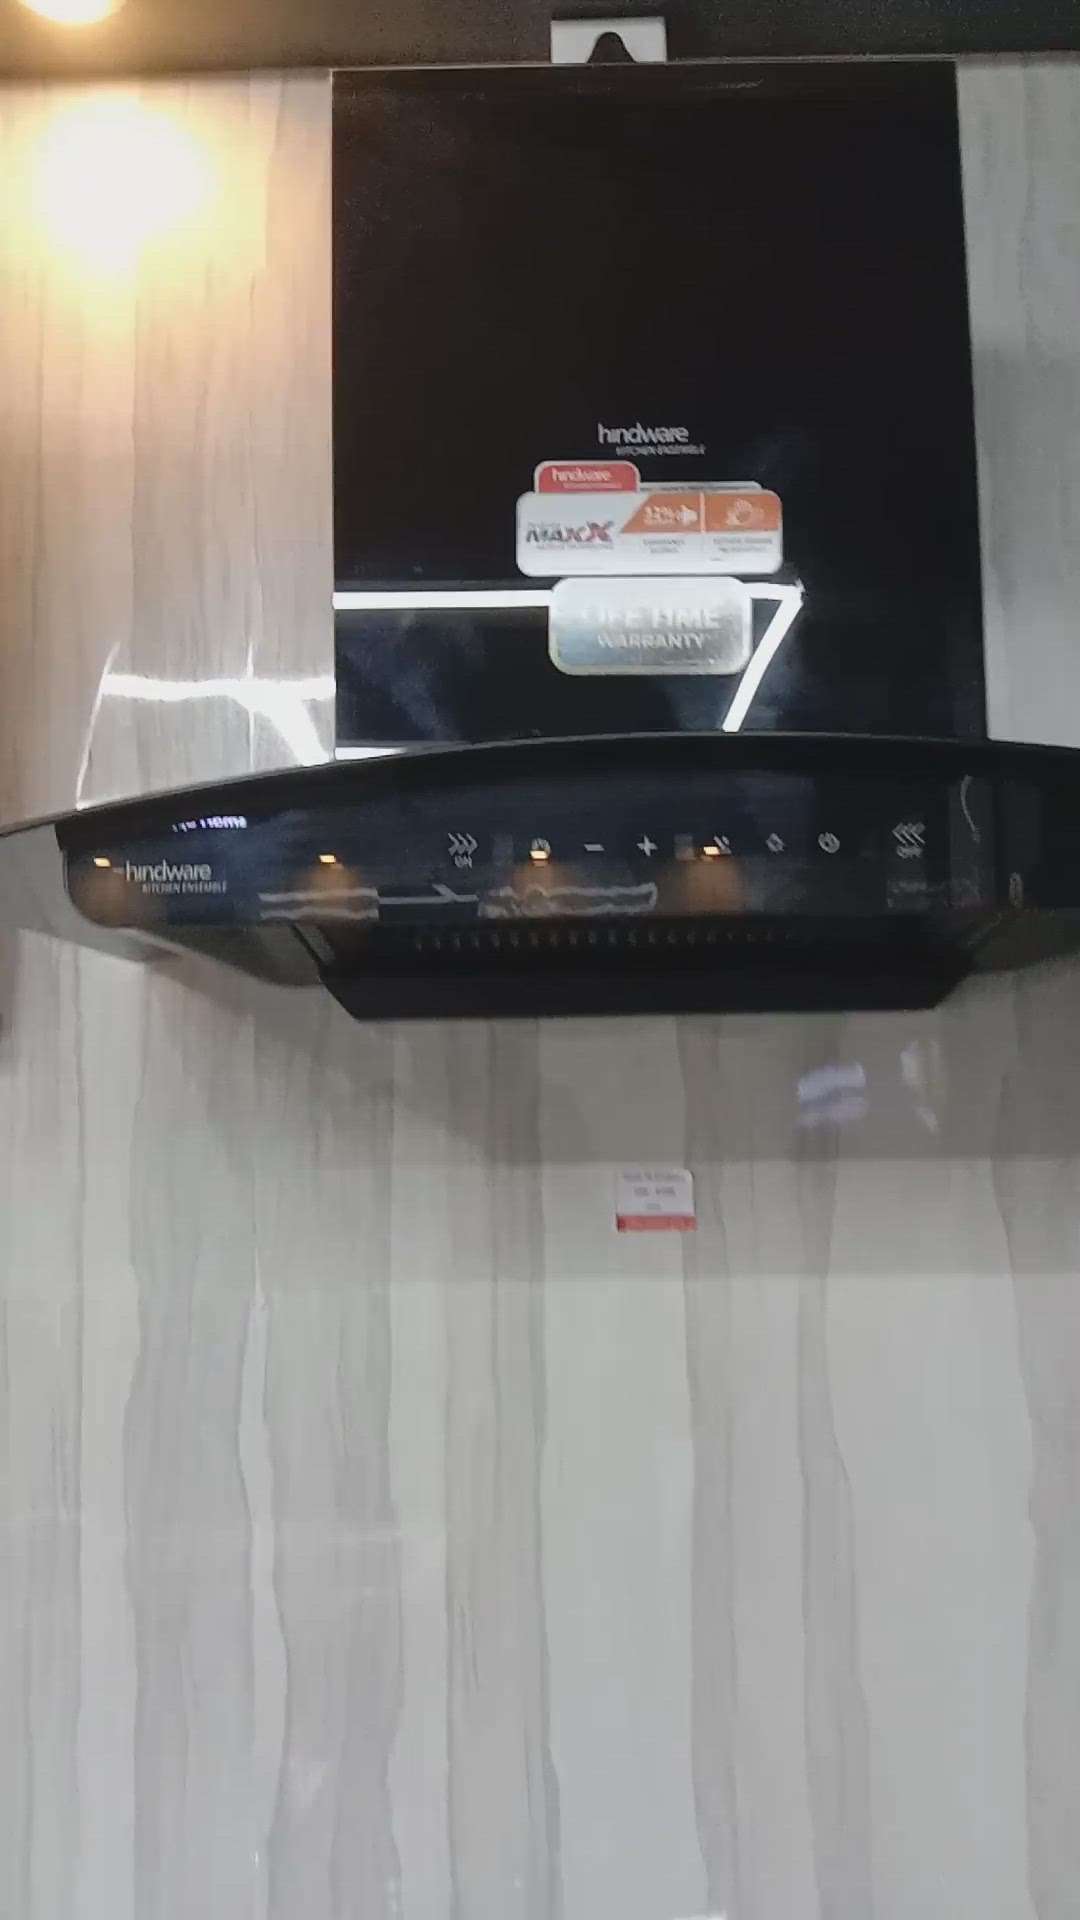 ELECTRIC CHIMNEY
Hindware brand
Best  price  #omega kitchen store kalamassery  #hindware  #kichenmodels #more details
contact me, 9656265525